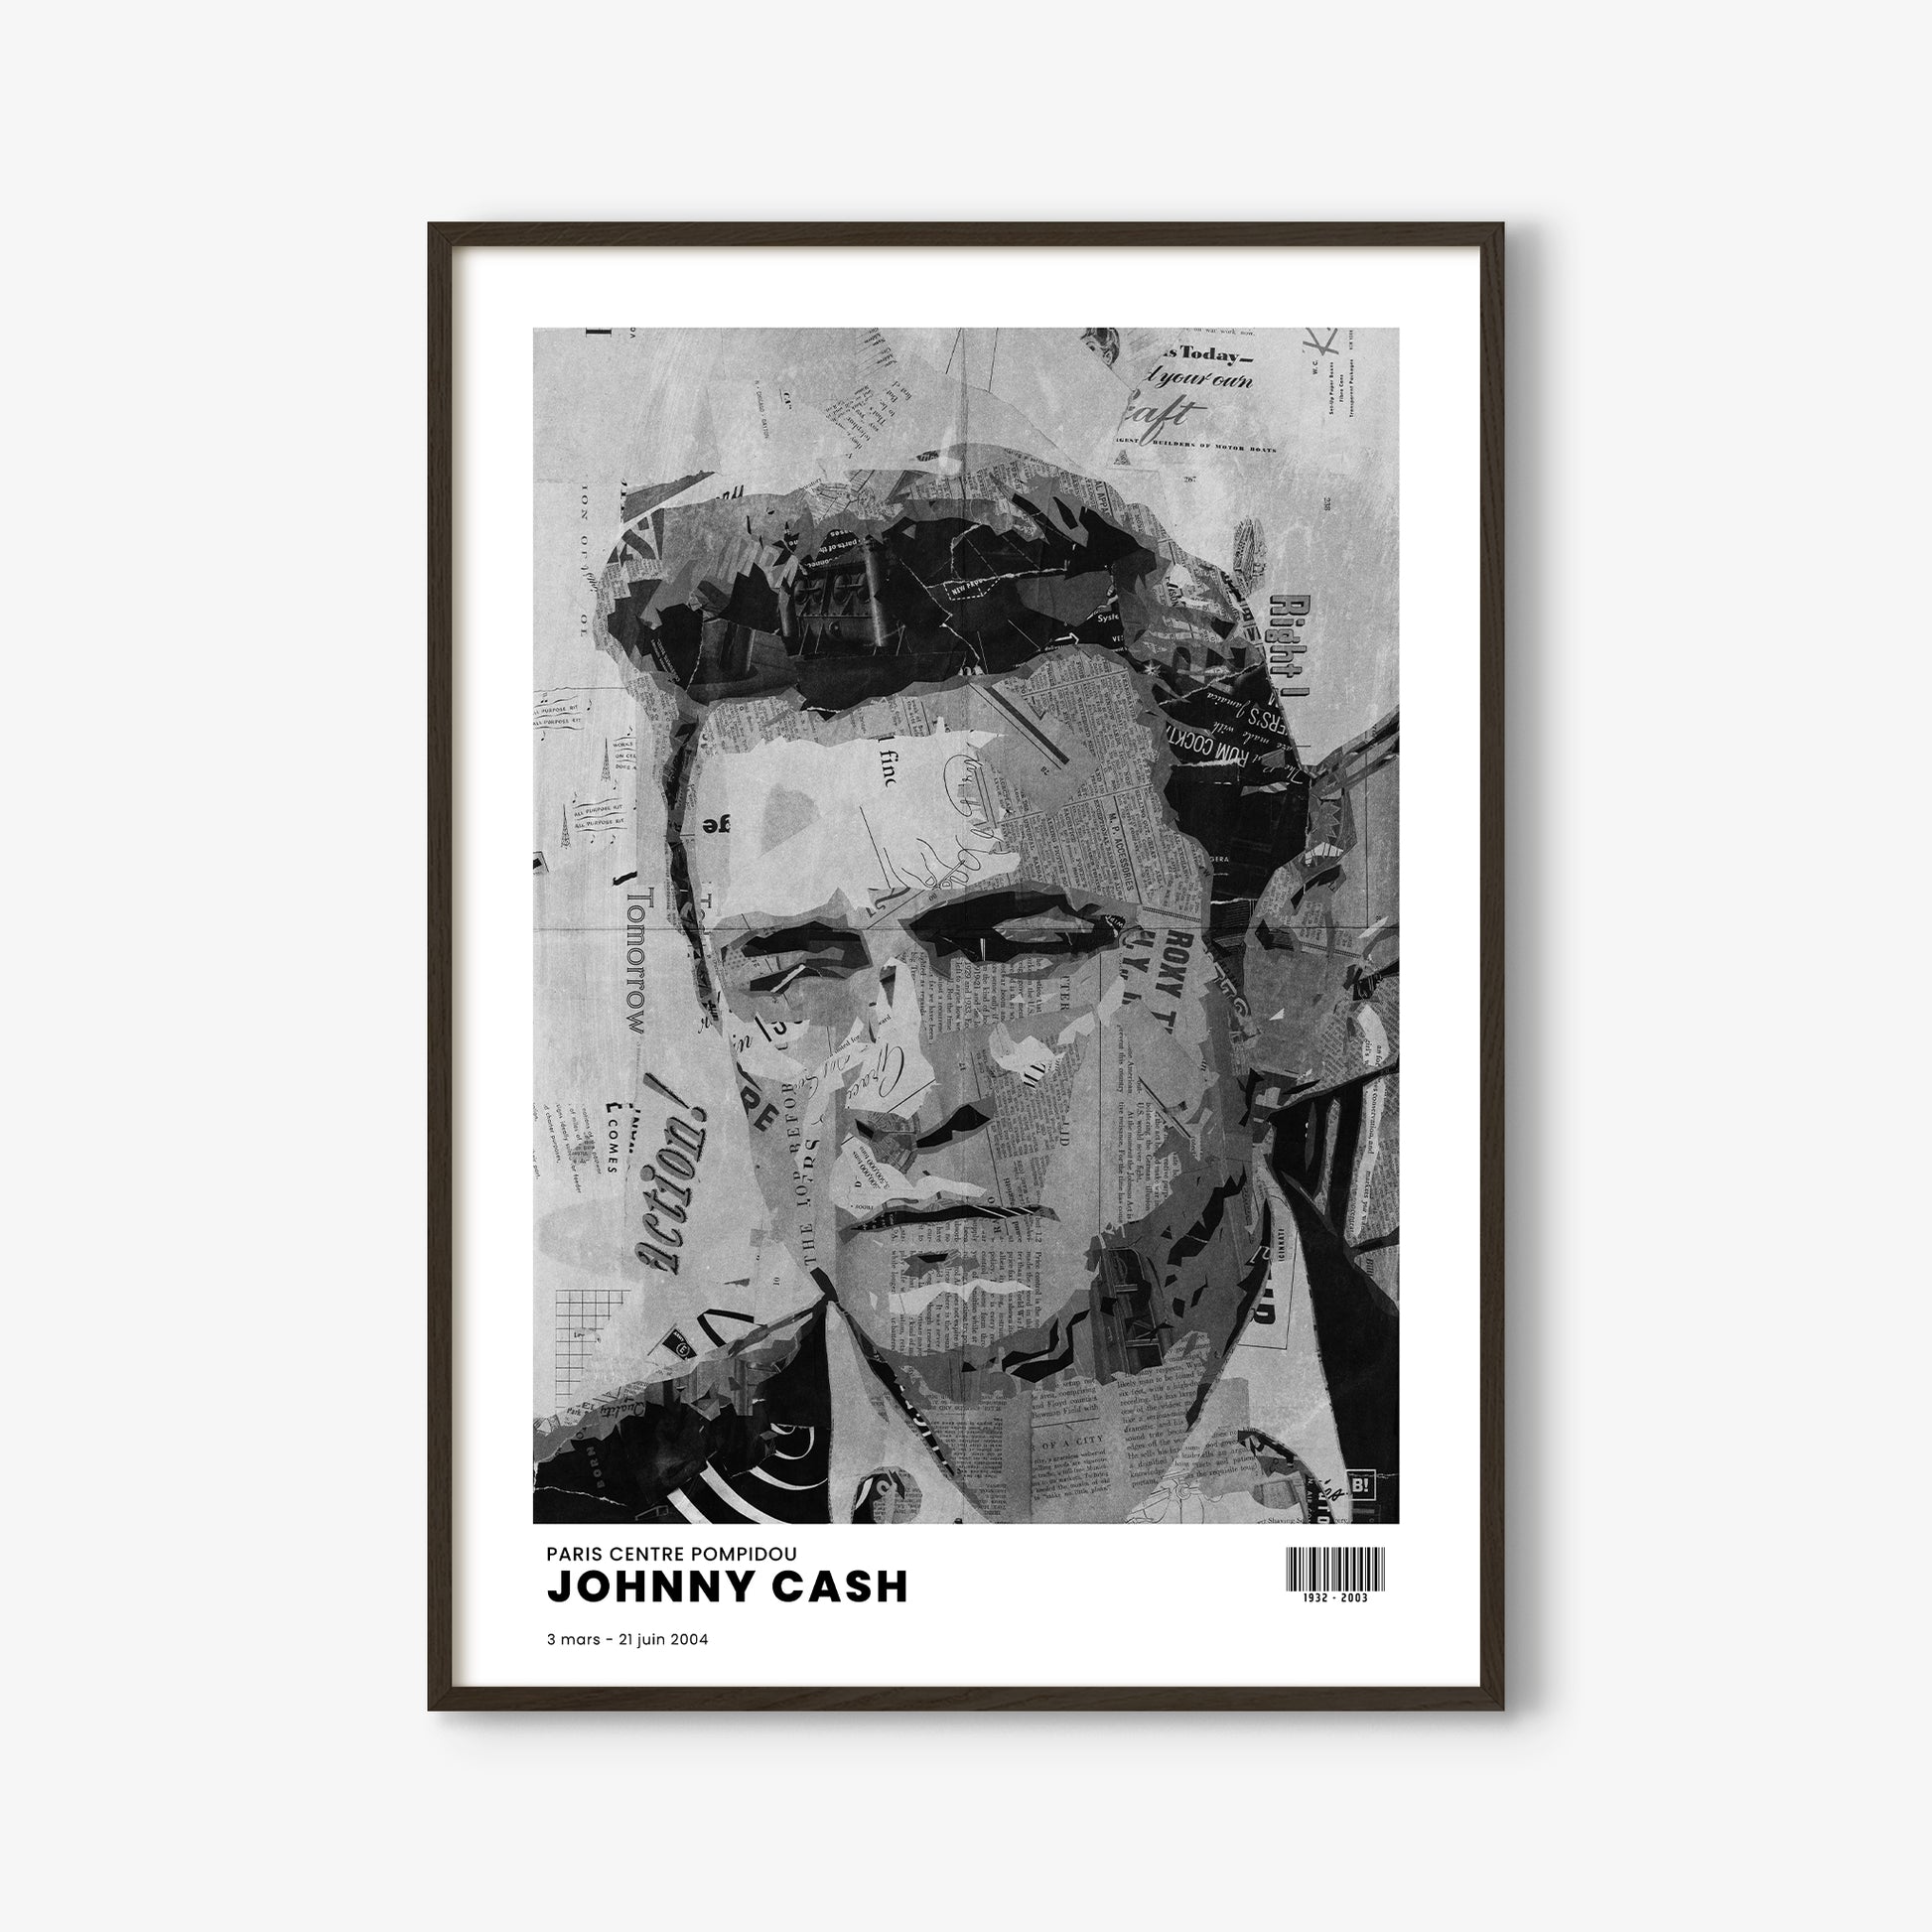 Be inspired by Iconic Johnny Cash Paris Centre Pompidou Exhibition Art Print. The artwork is presented in a black oak frame that captures its timeless beauty in every detail.